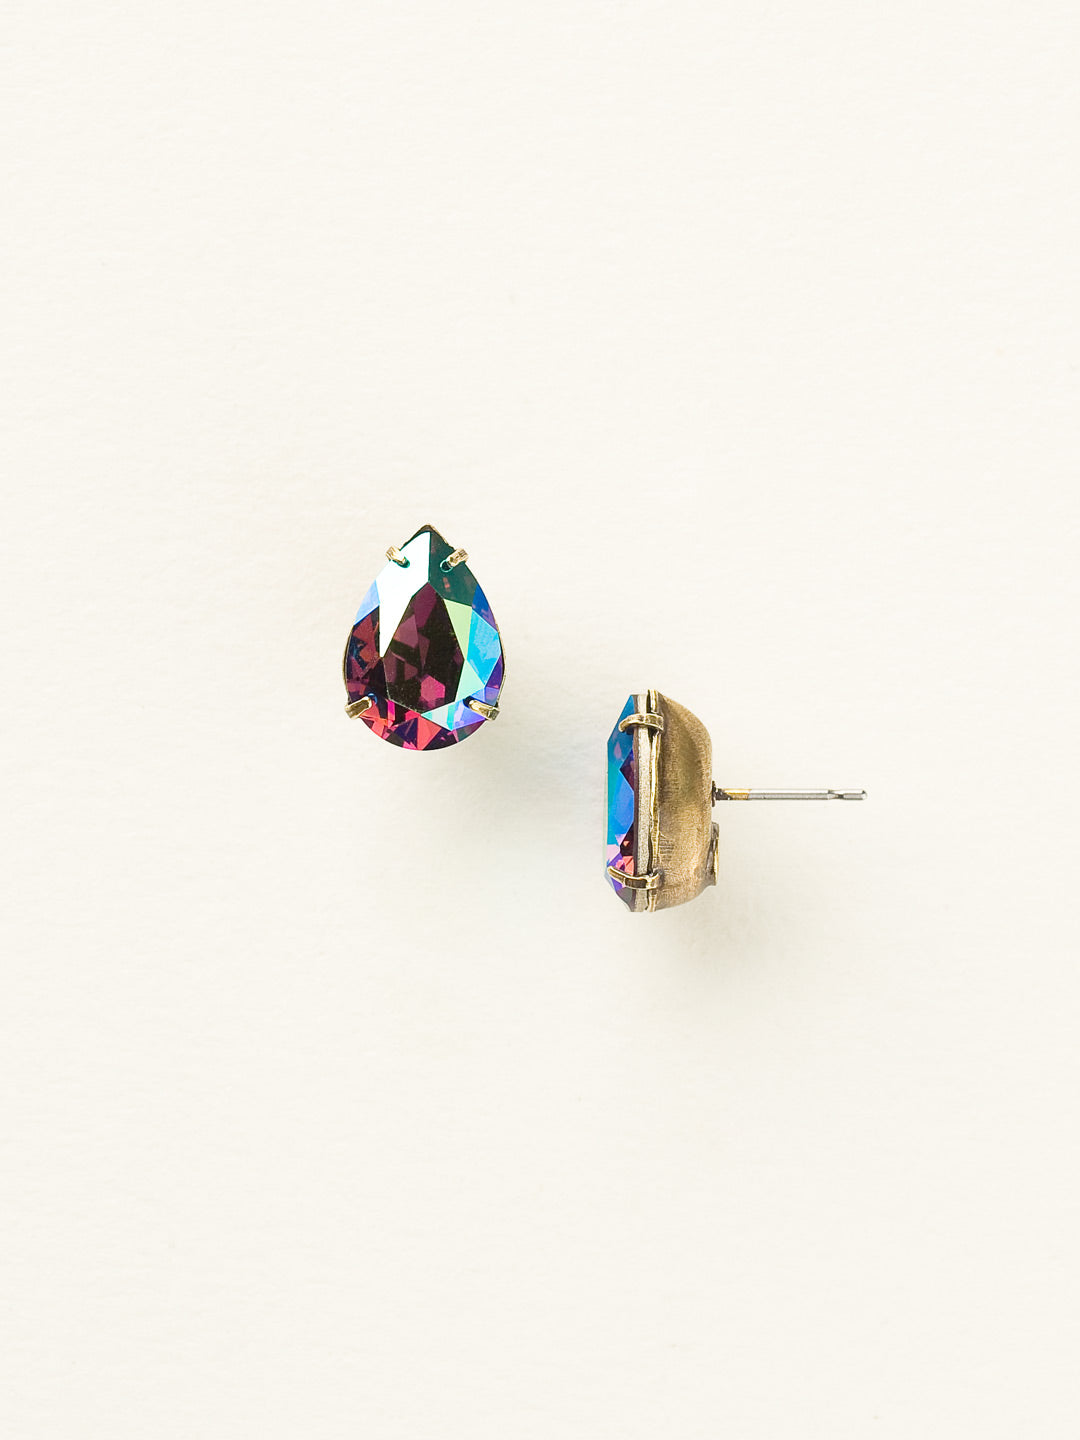 Ginnie Stud Earrings - ECR115AGSPM - <p>A beautiful basic stud. These classic single teardrop post earrings are perfect for any occasion, especially the everyday look. A timeless treasure that will sparkle season after season. From Sorrelli's Super Multi collection in our Antique Gold-tone finish.</p>